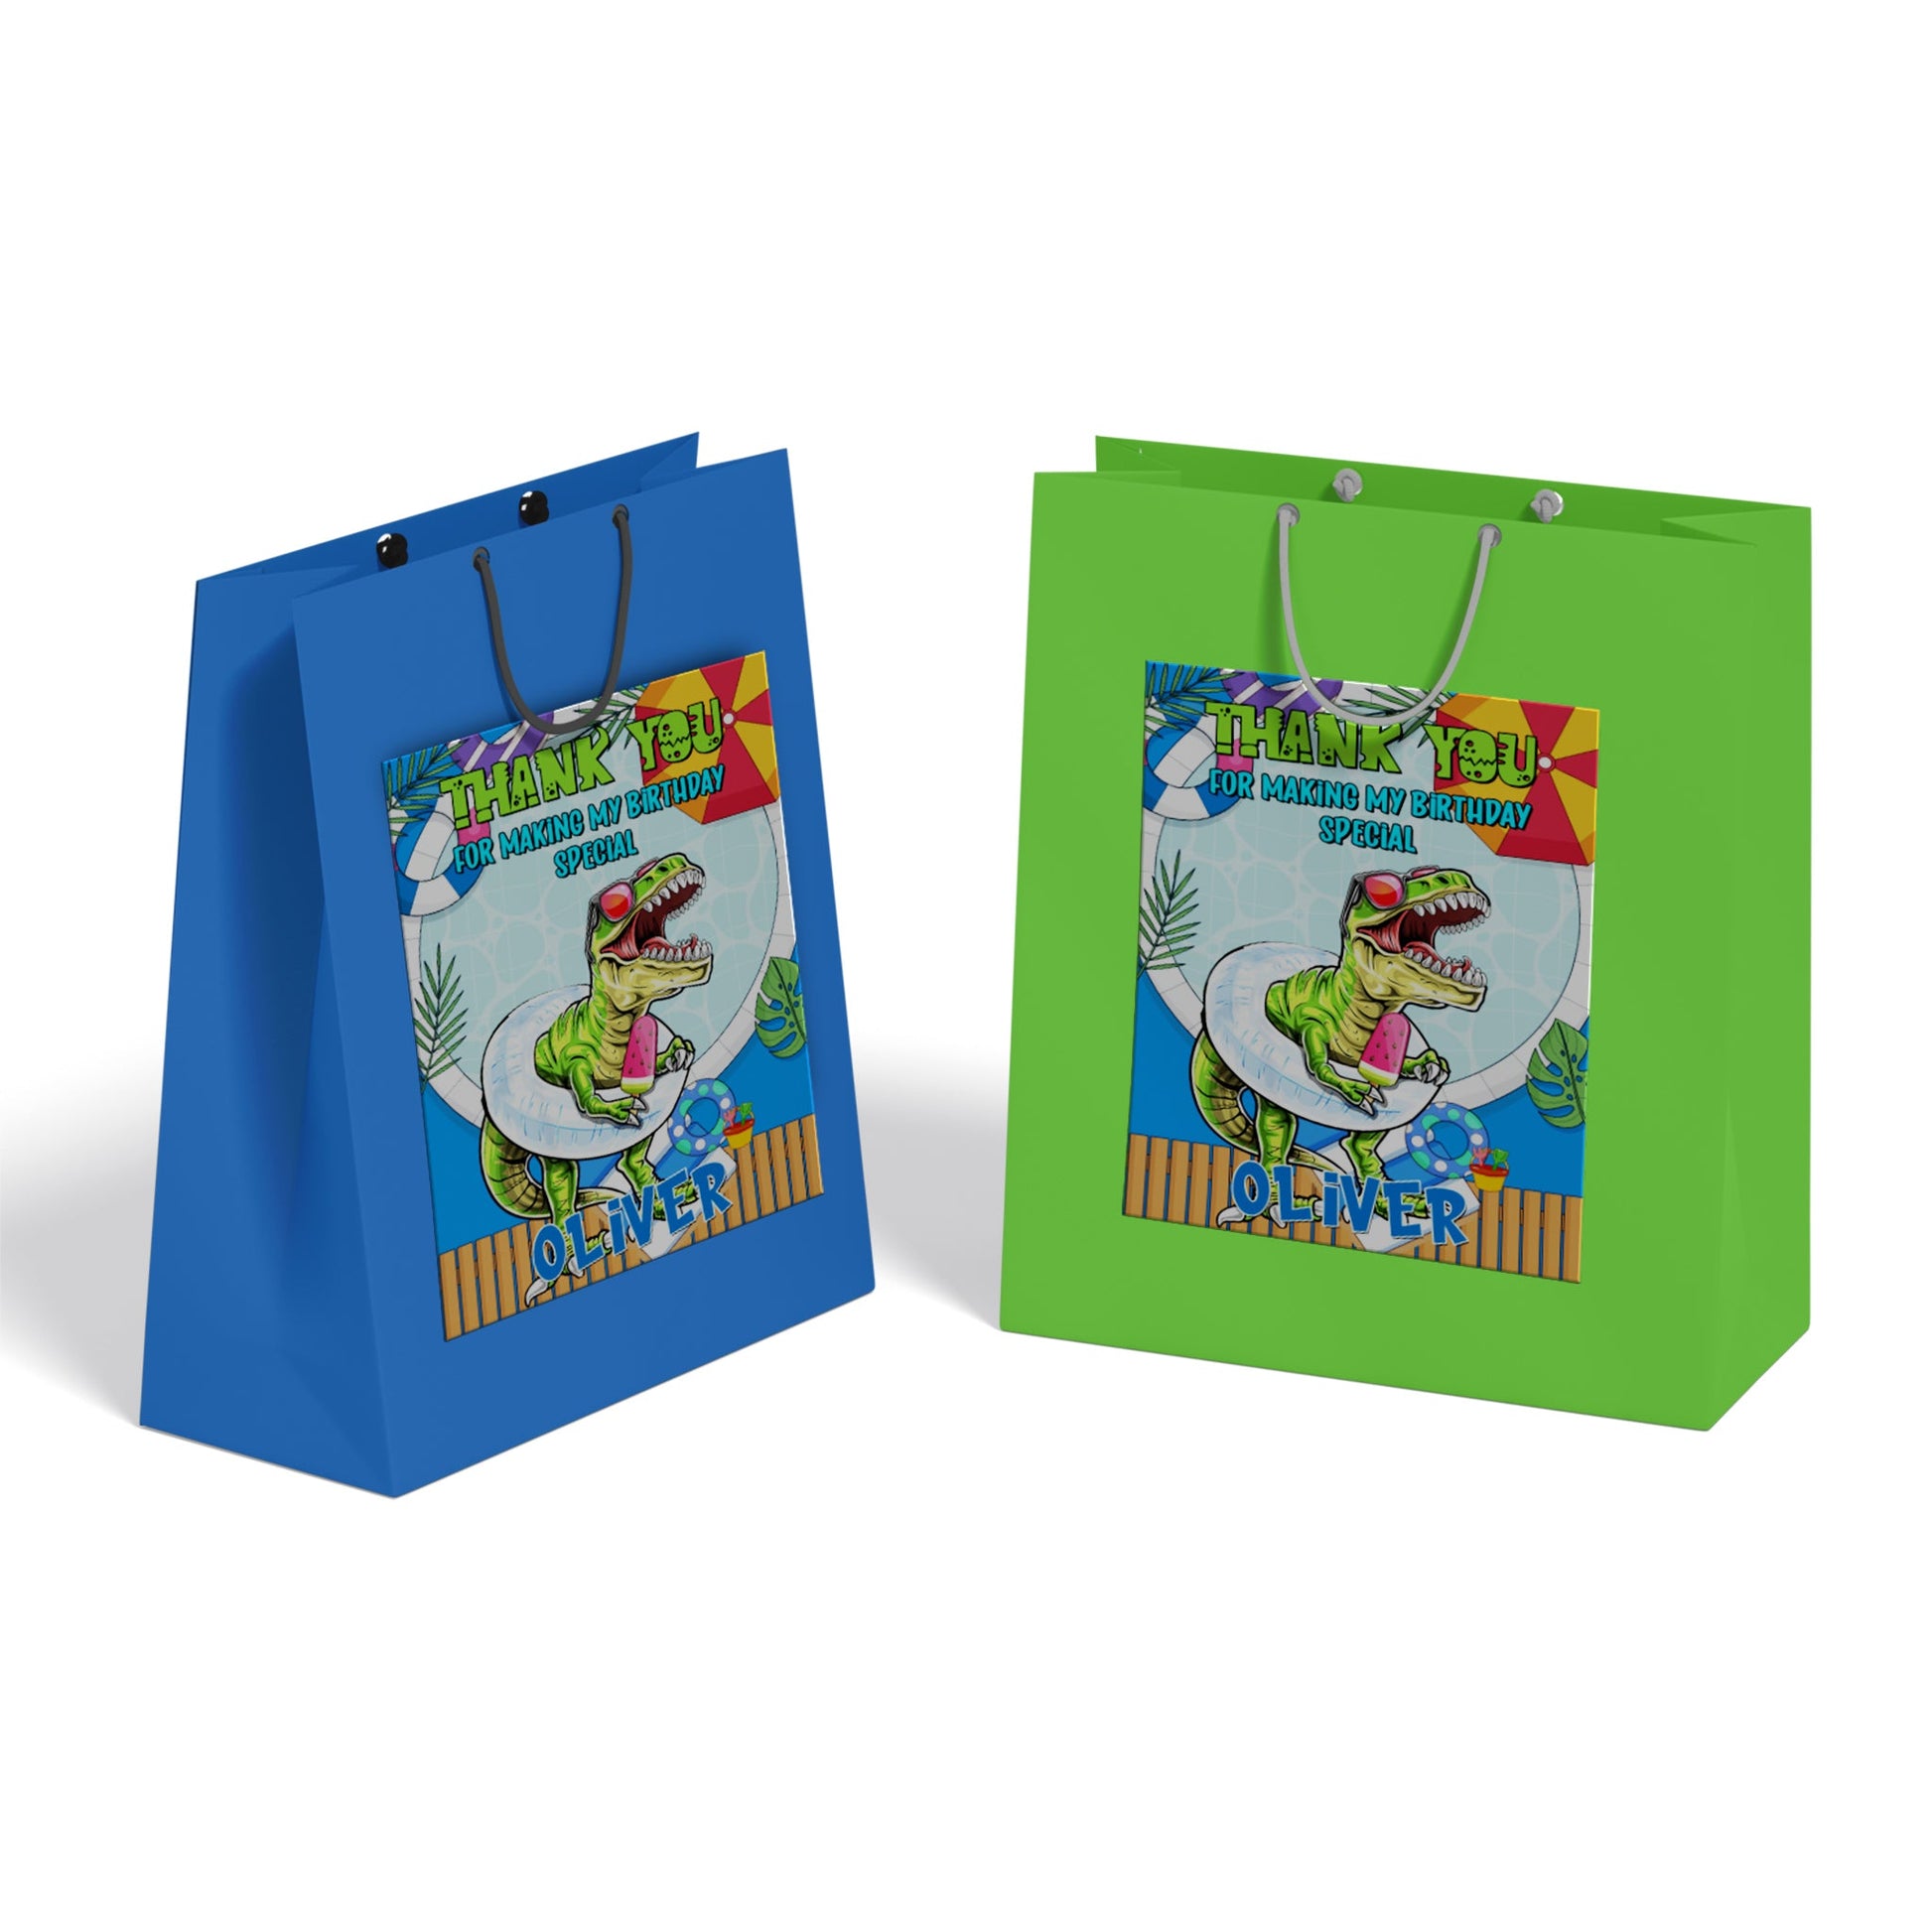 Dinosaur-themed goody bag labels for party giveaways